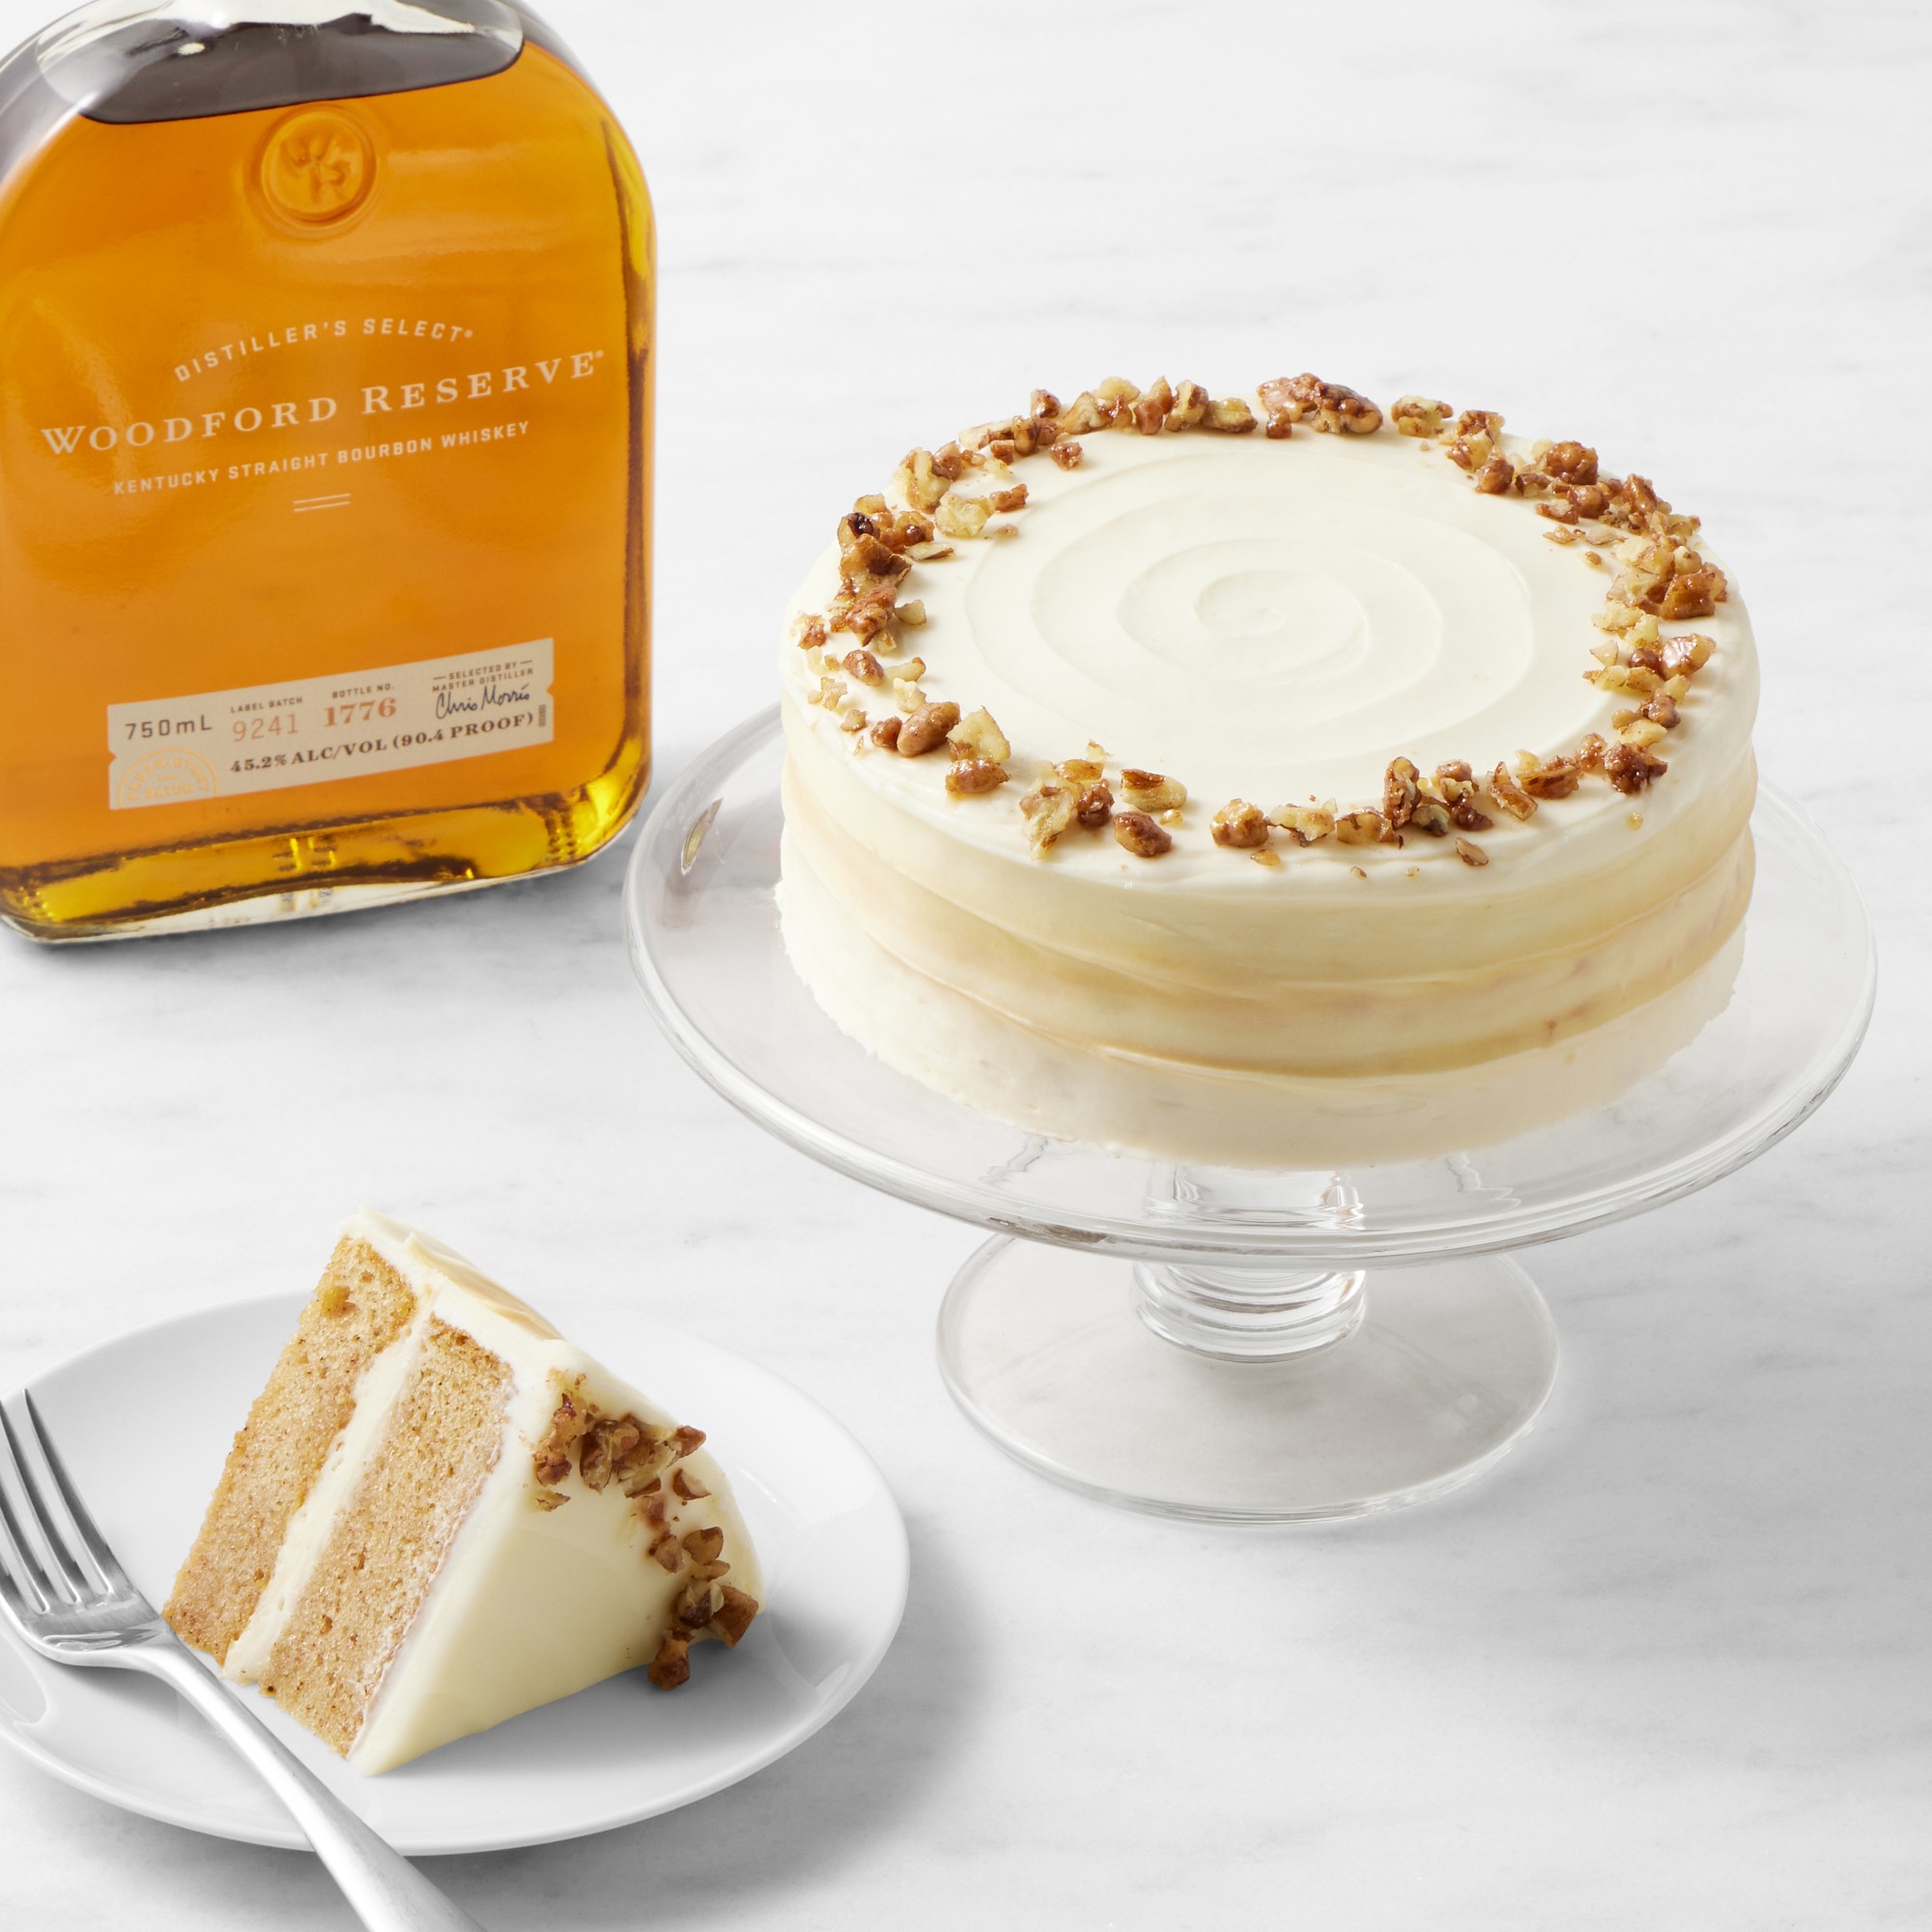 Woodford Reserve x Williams Sonoma Two- Layer Bourbon Spice Cake, Serves 10-12